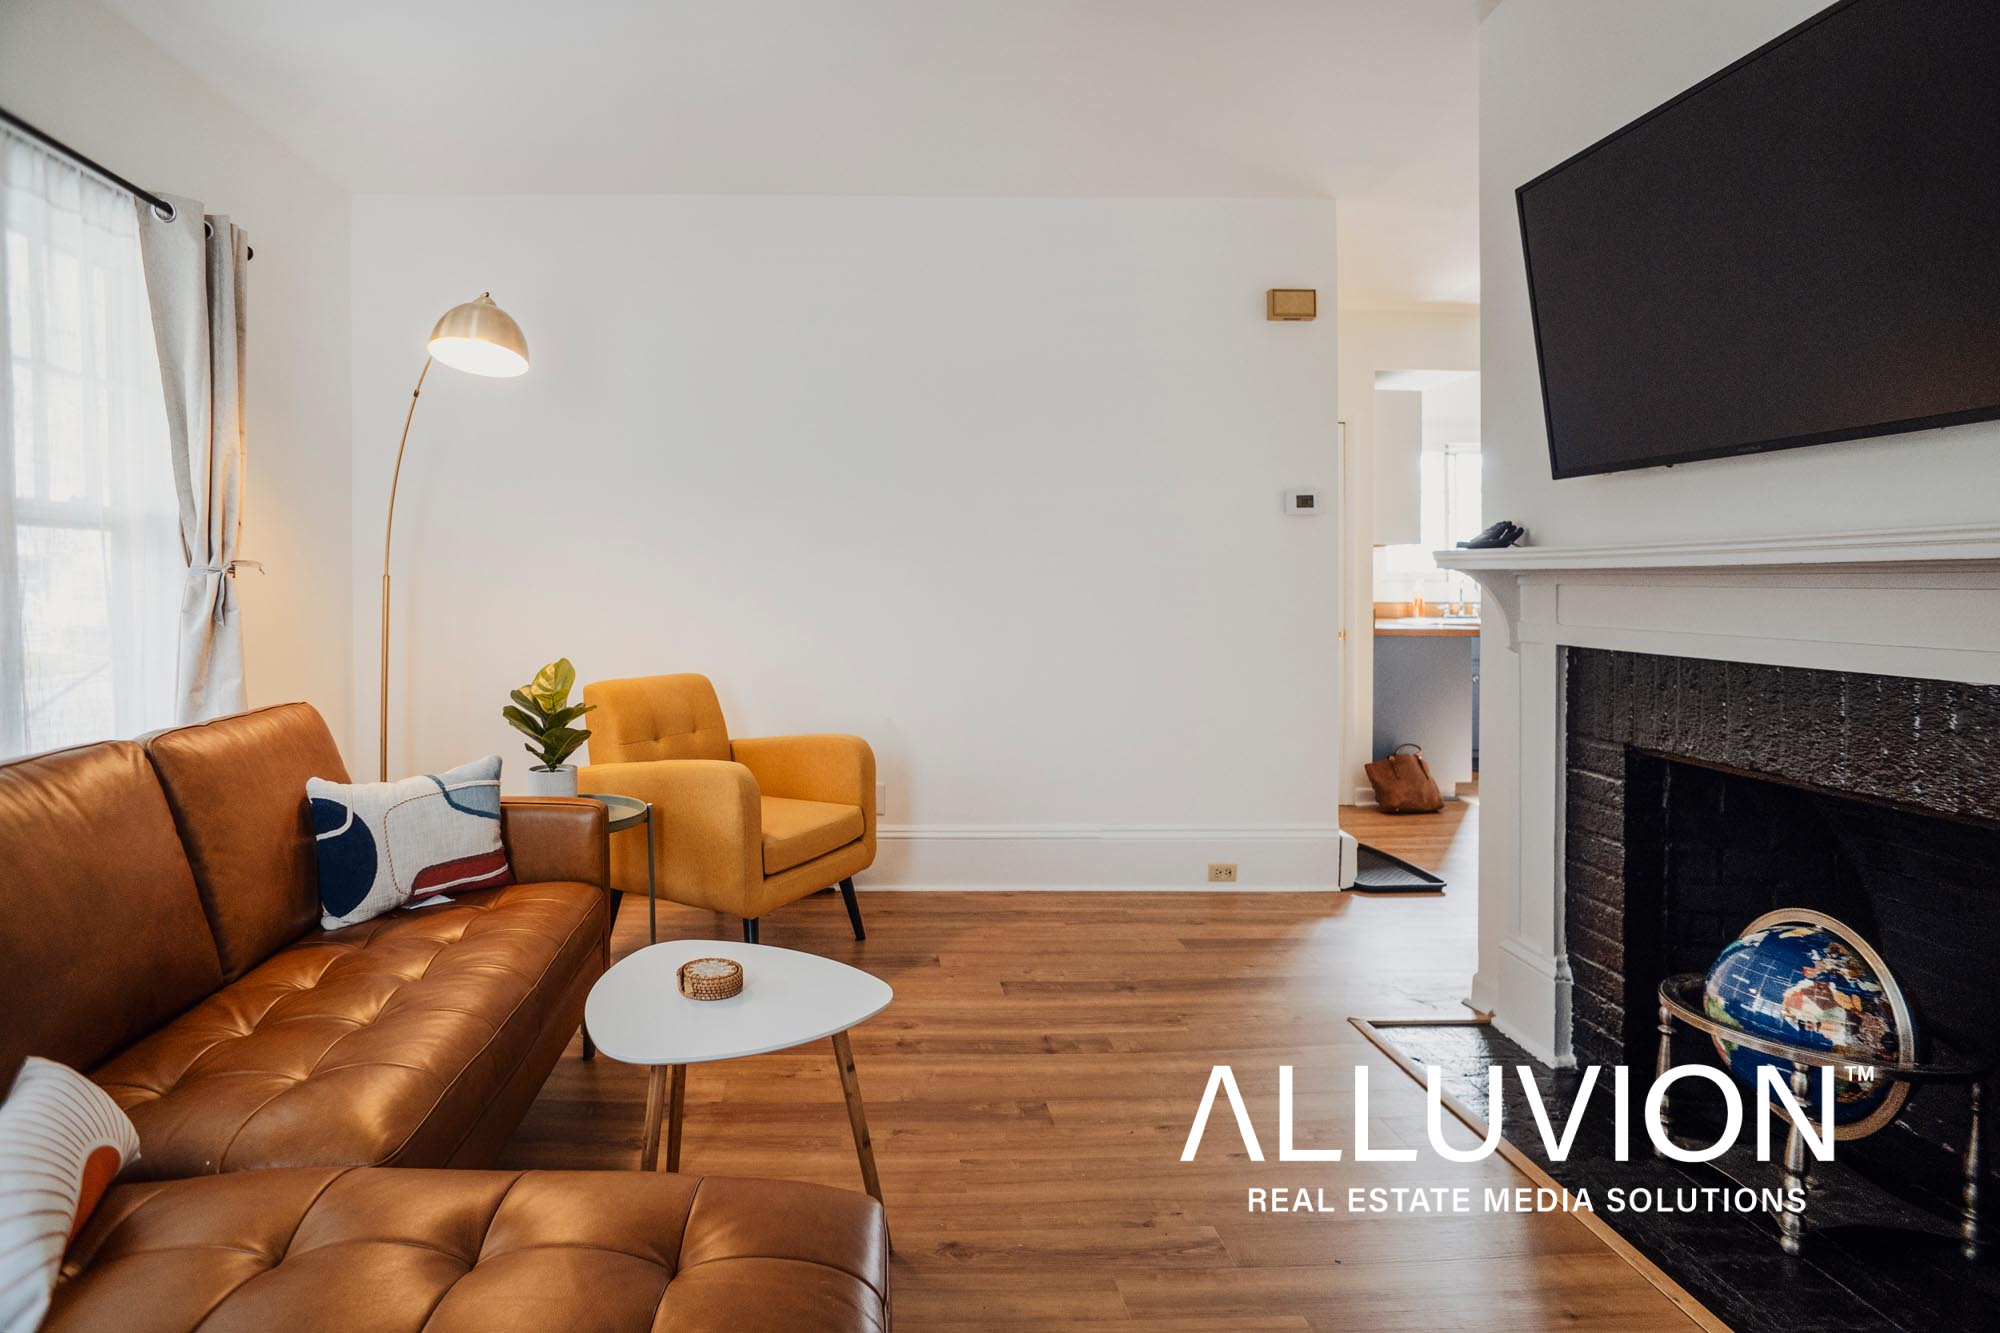 Airbnb Apartment in Kingston, NY – Upstate Airbnb Photography and Film and Photoshoot Locations in Hudson Valley and Catskills